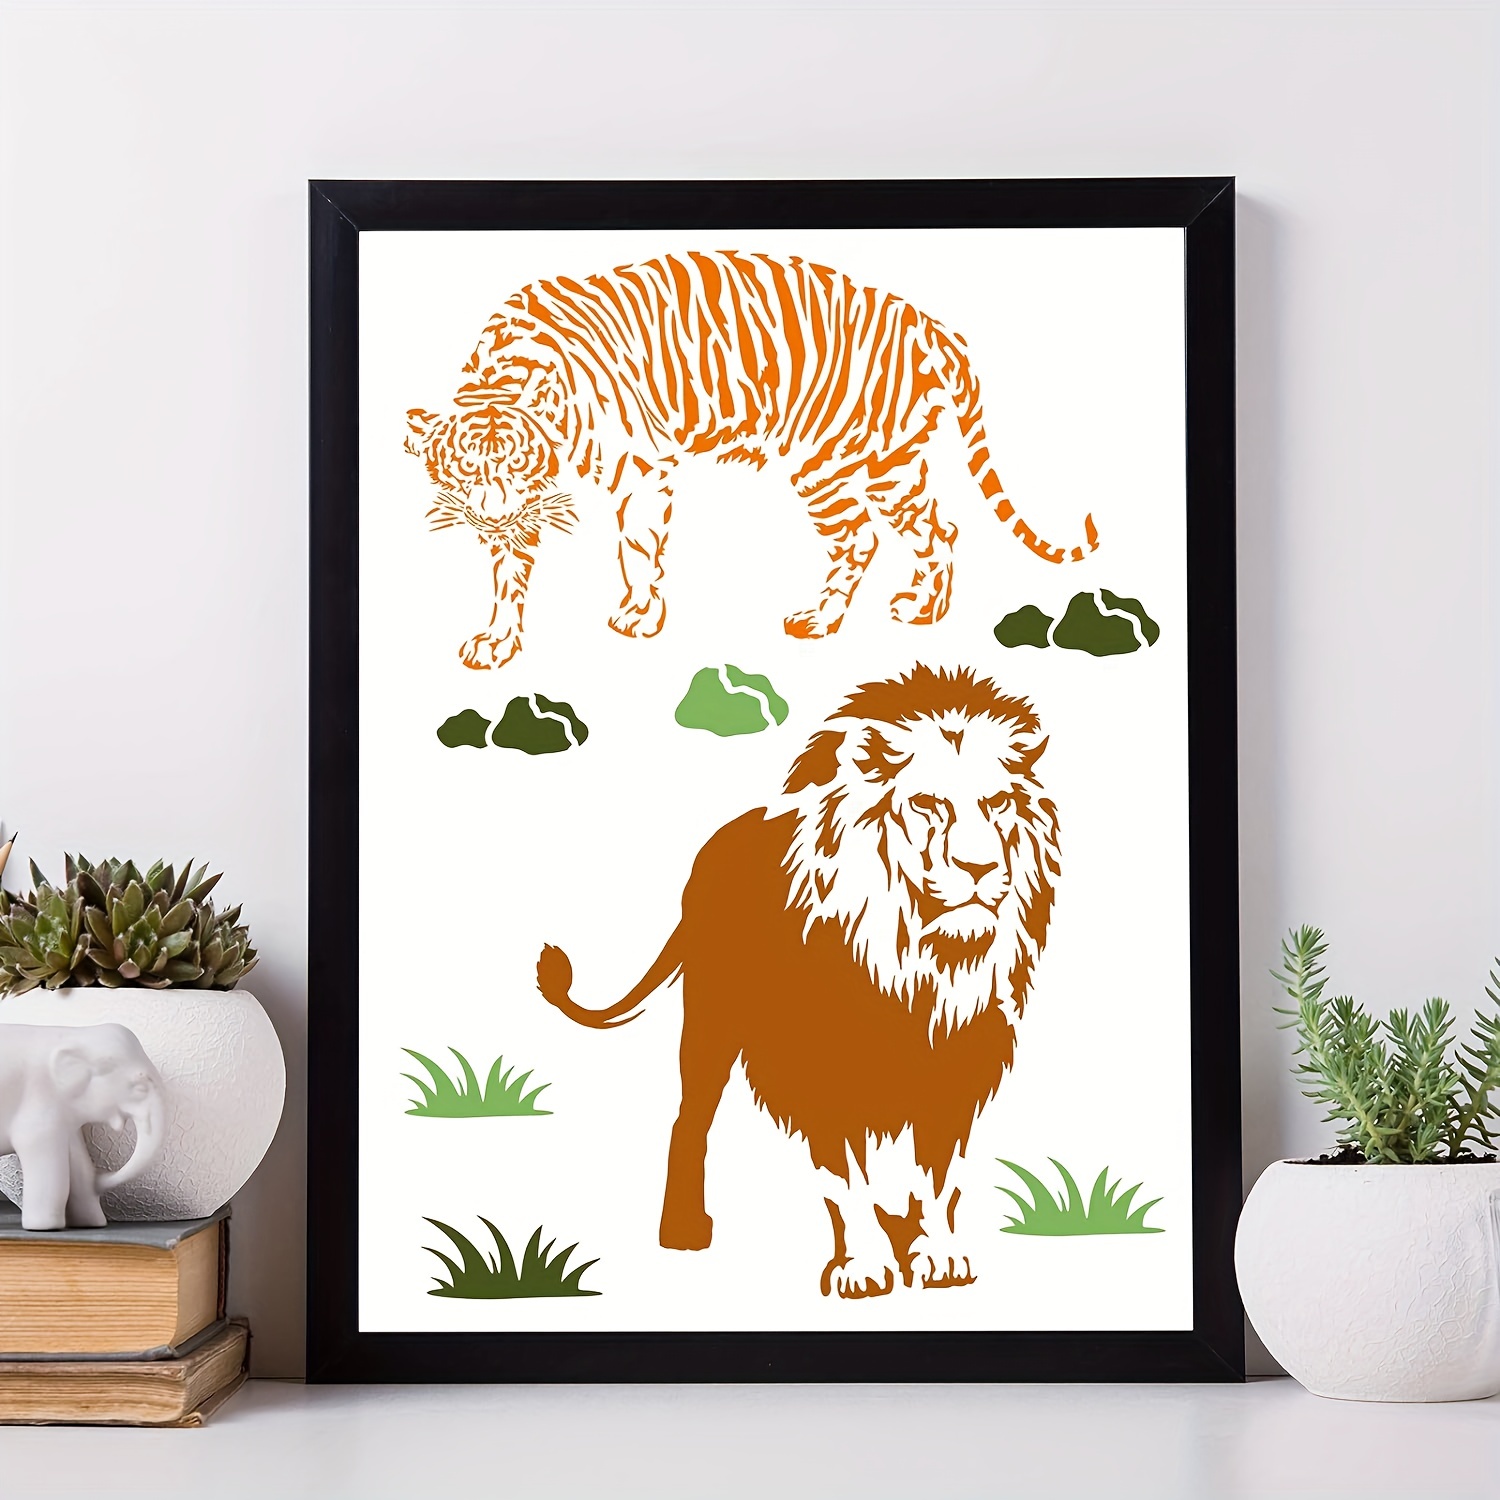 9 Pieces Animal Stencil Templates Reusable Animal Painting Stencil Bear  Tiger Elephant Horse Lion Giraffe Zebra Rhino Deer Craft Drawing Template  for